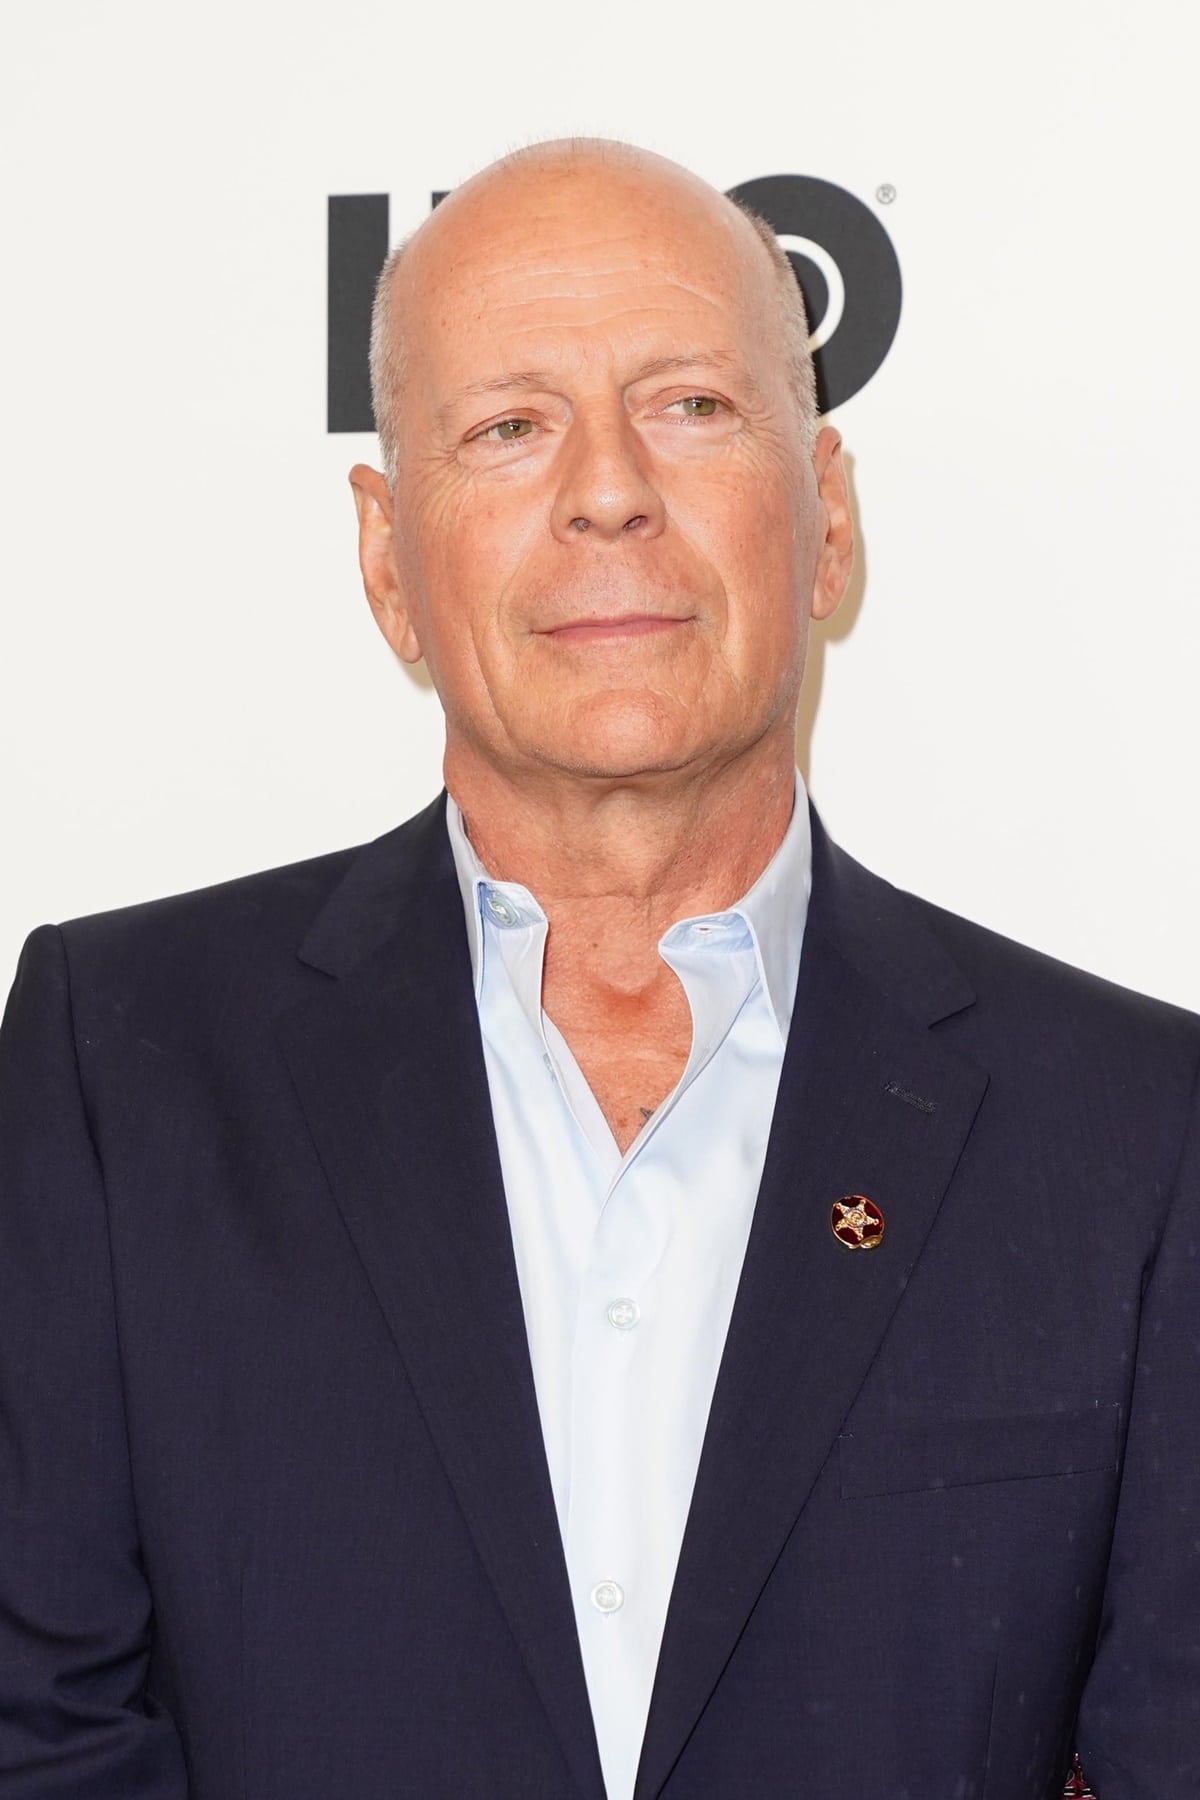 Bruce Willis' family, including his wife Emma, children, ex-wife Demi Moore, and their children, are rallying behind the actor after he was diagnosed with frontotemporal dementia